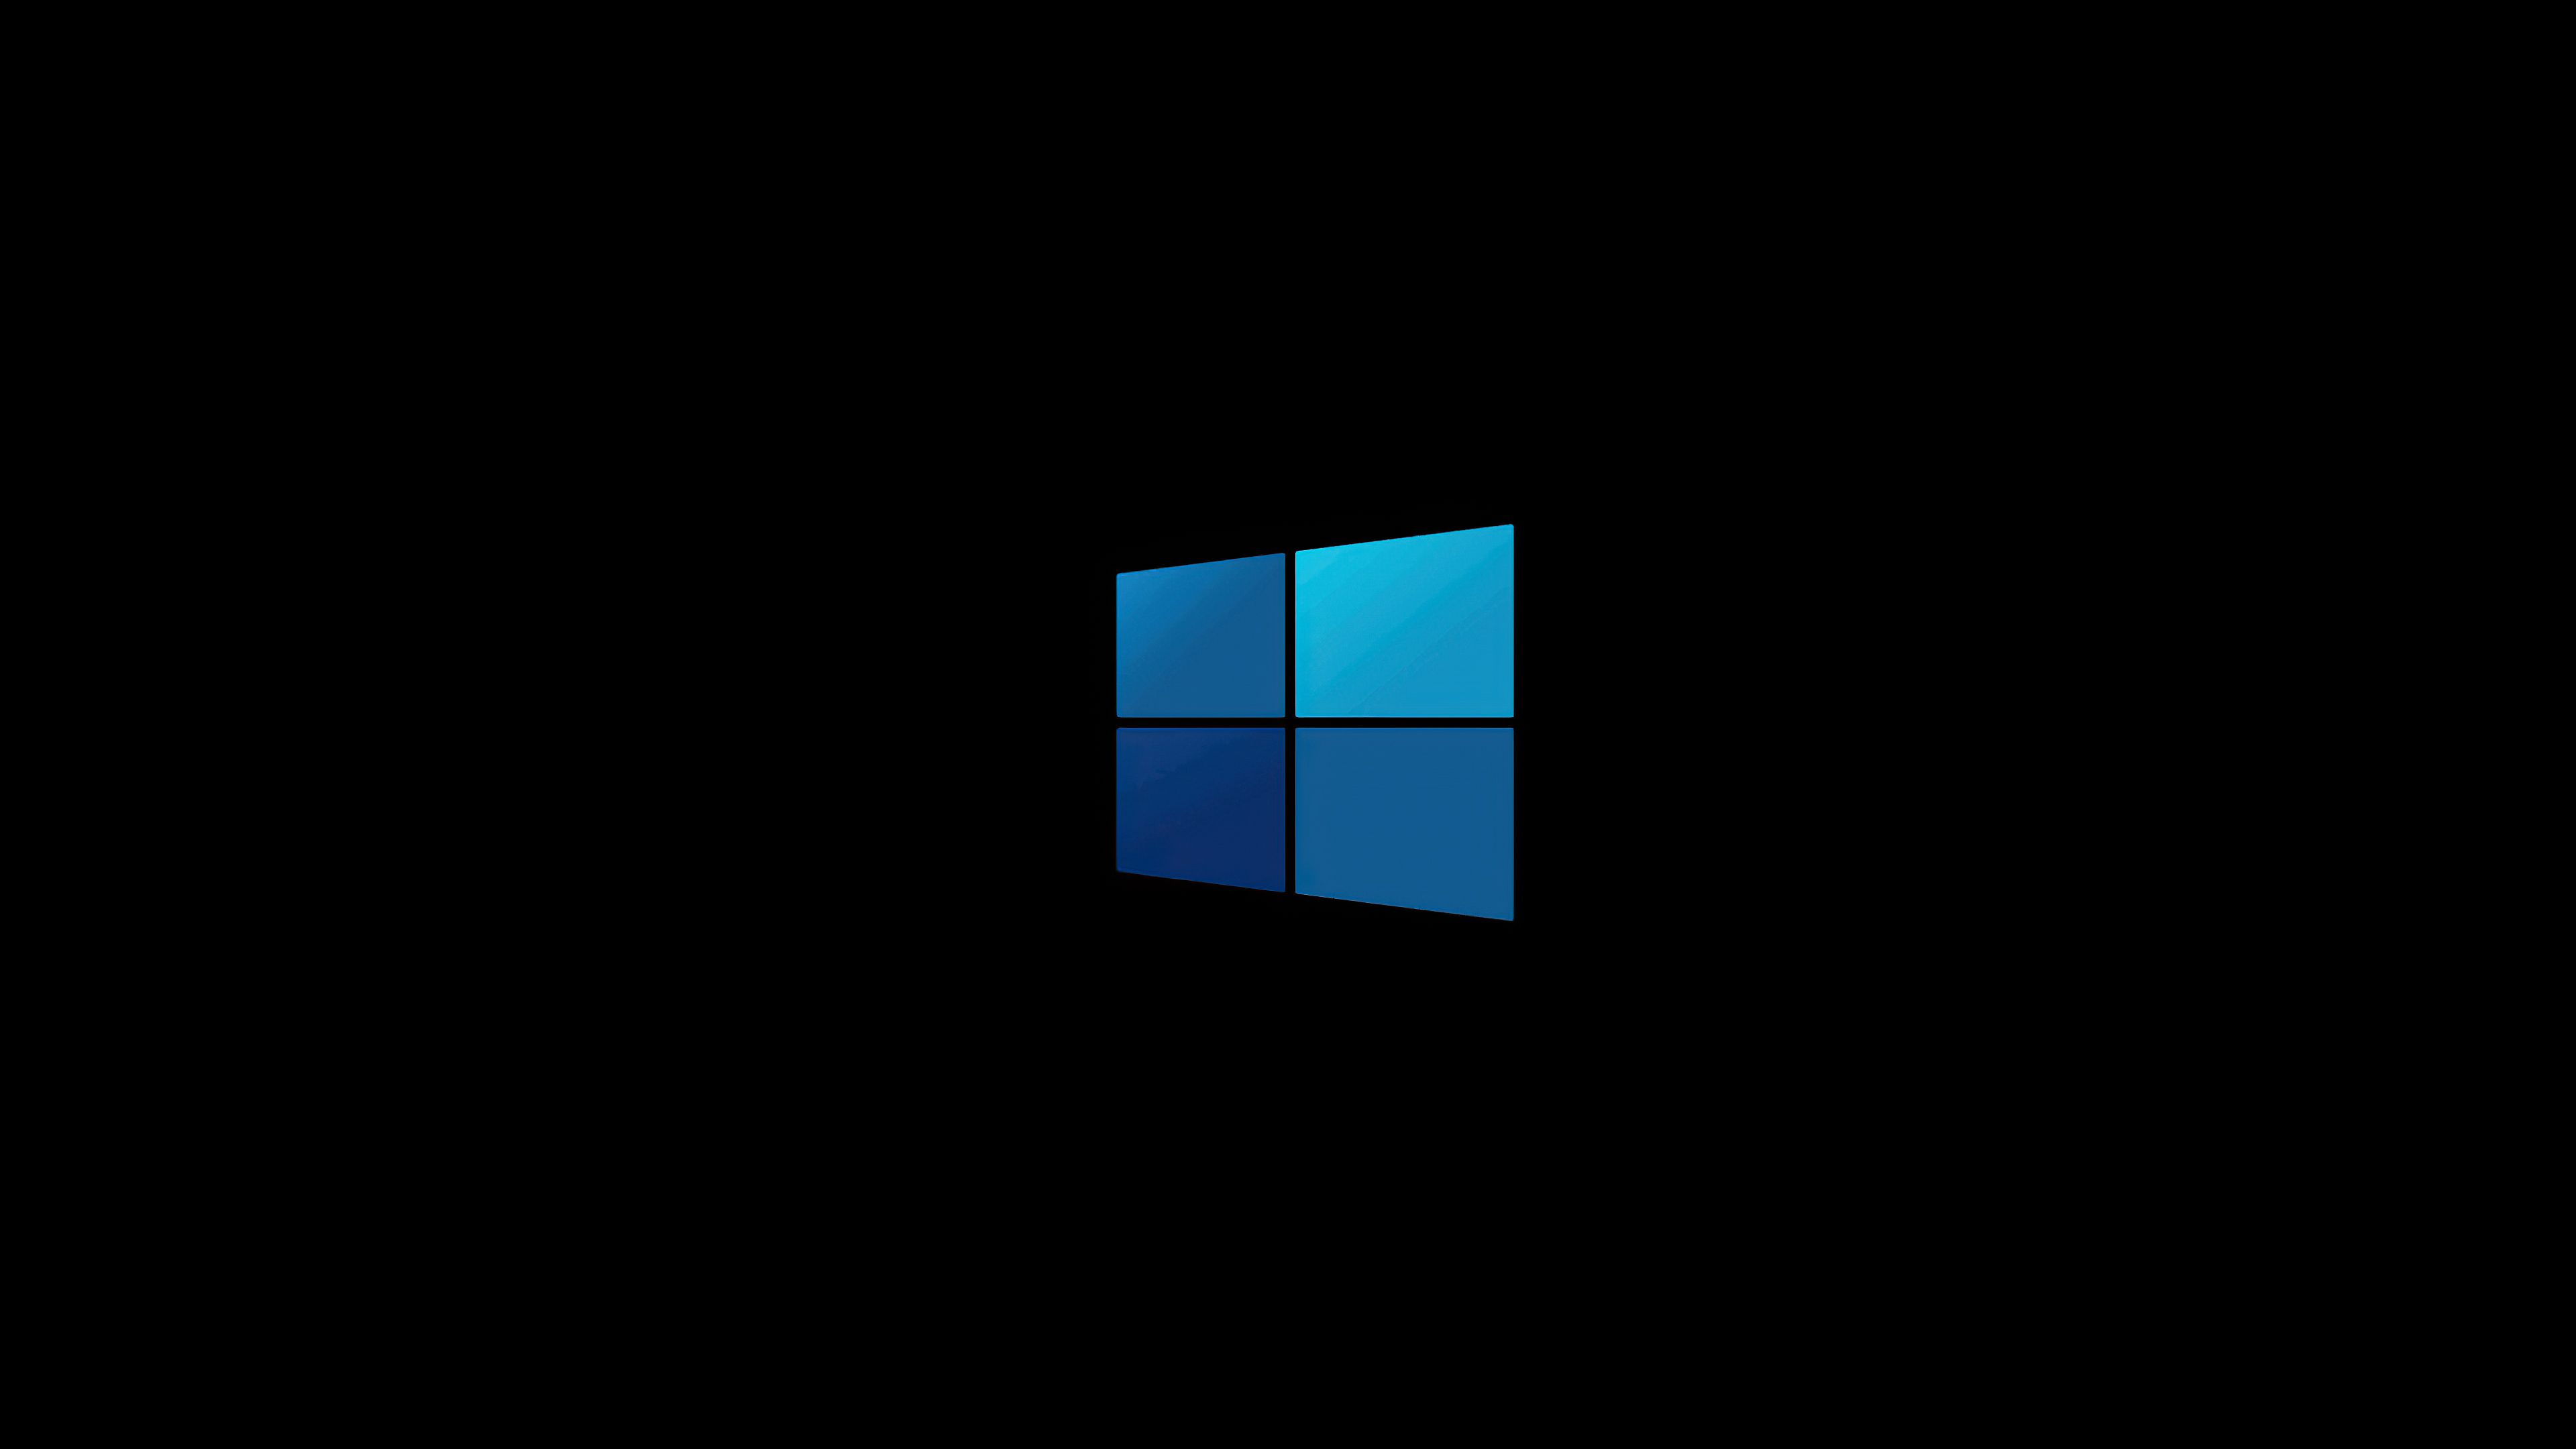 Windows 10 Minimal Logo 4k, HD Computer, 4k Wallpapers, Image, Backgrounds, Photos and Pictures